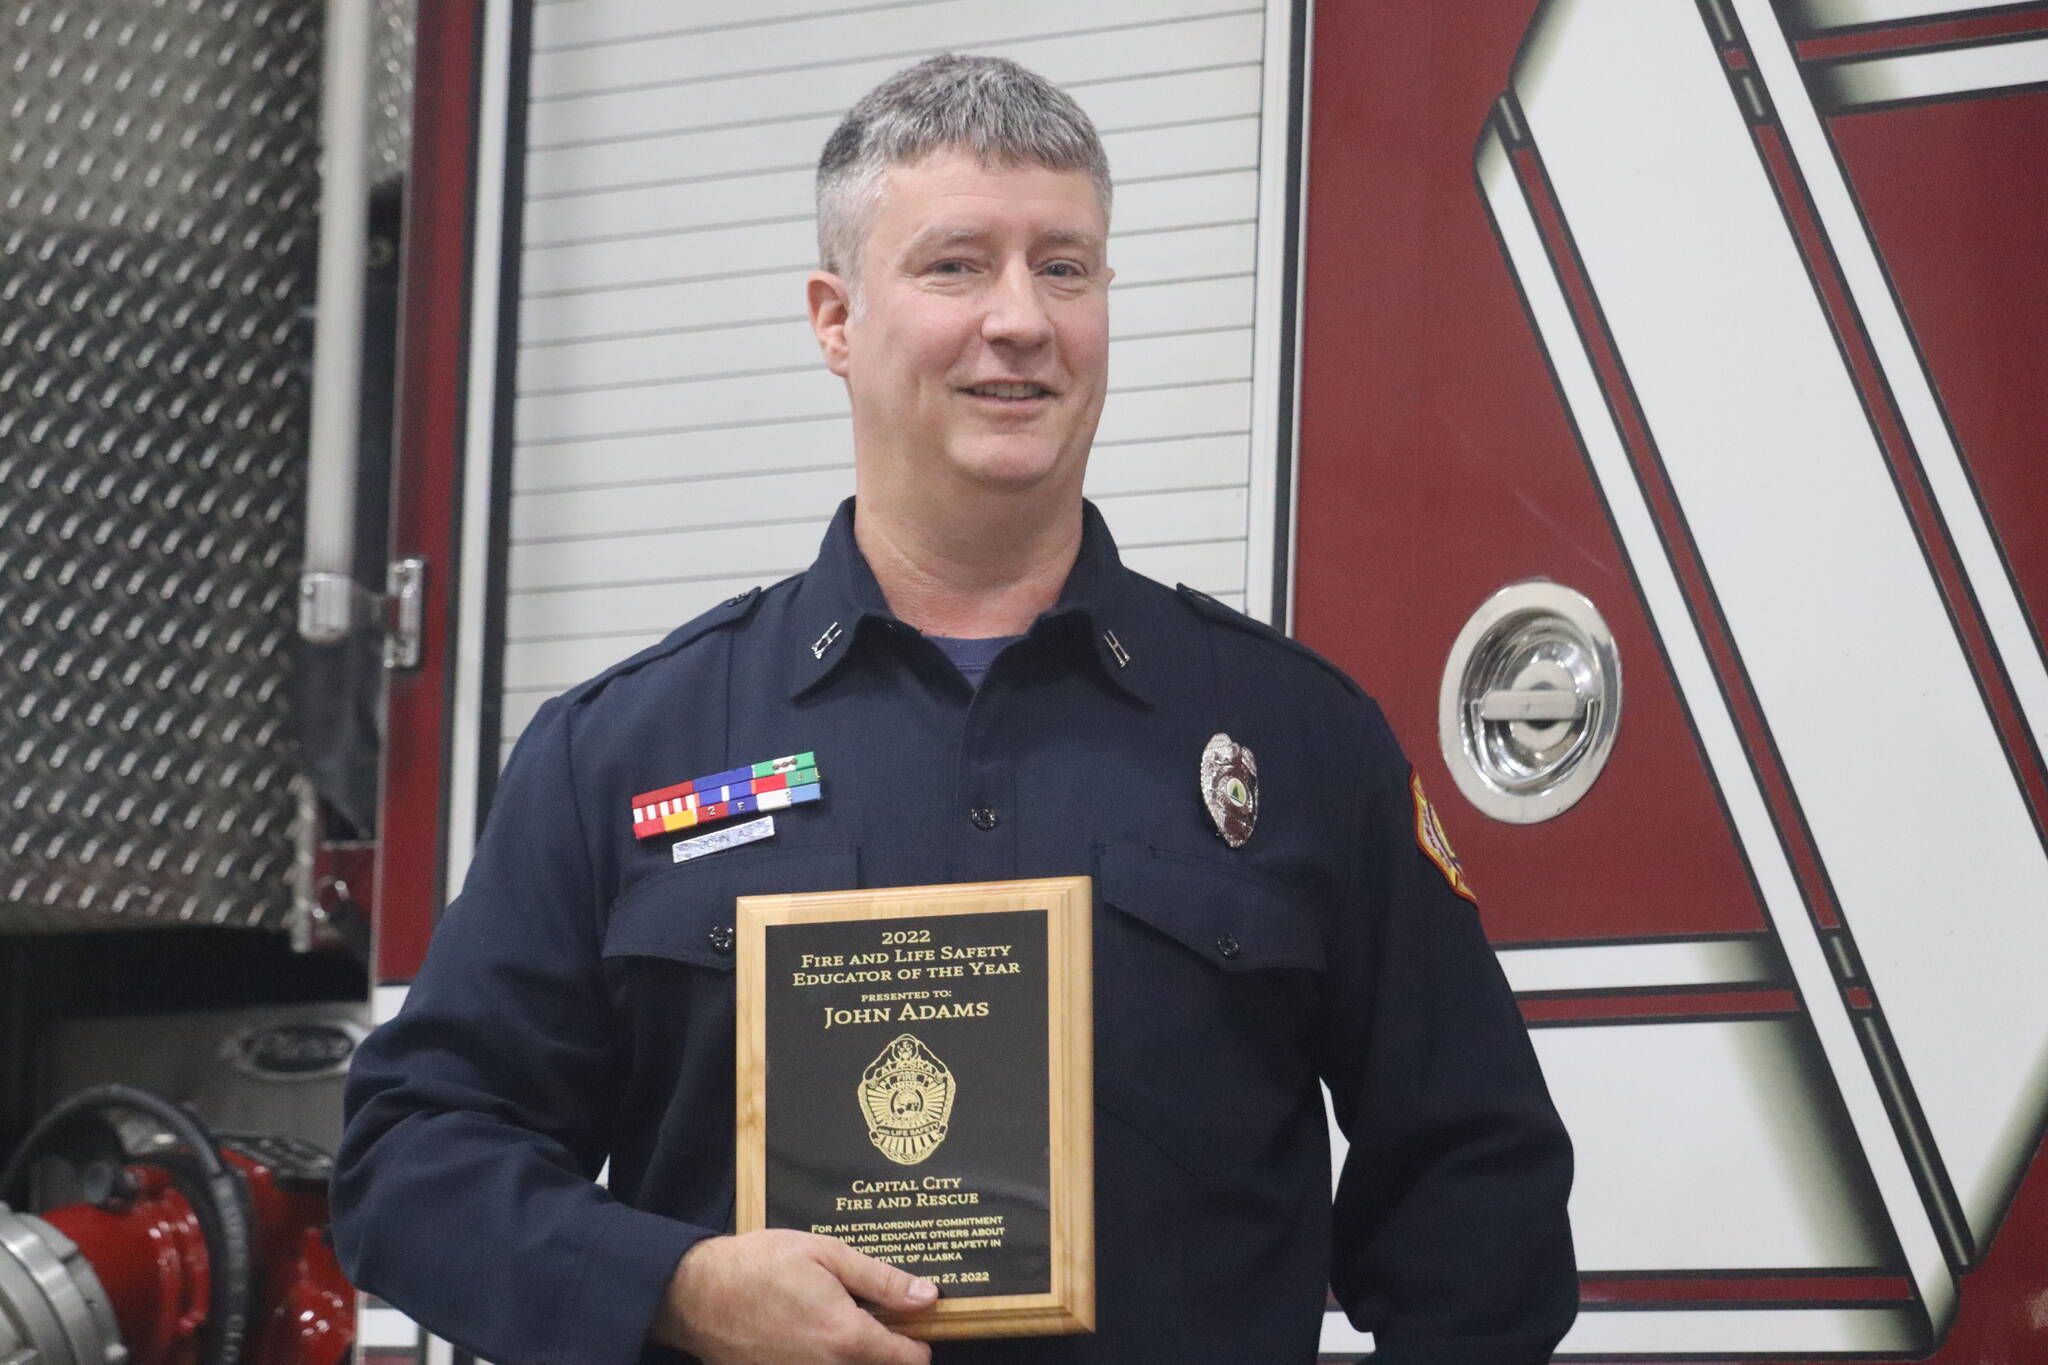 CCFR Acting Captain John Adams poses with plaque awarded at his presentation ceremony on Tuesday, Nov. 1. Adams was awarded the 2022 Fire Life Safety Educator of the Year for his dedication to educating Juneau youth and community of fire safety. (Jonson Kuhn / Juneau Empire)